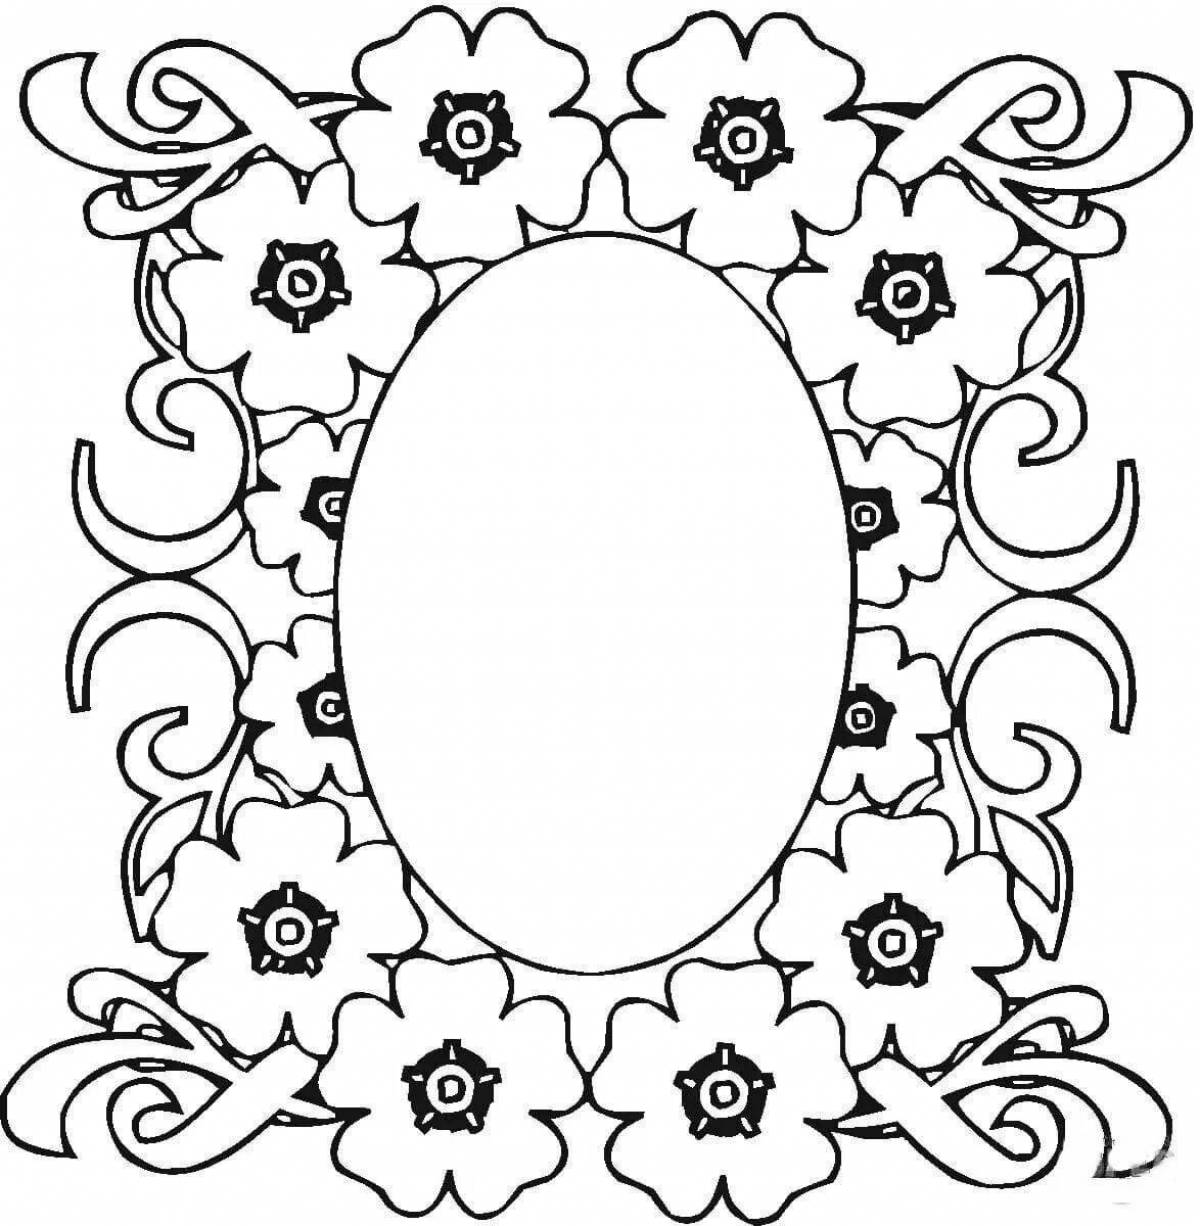 Toddlers playful coloring frame